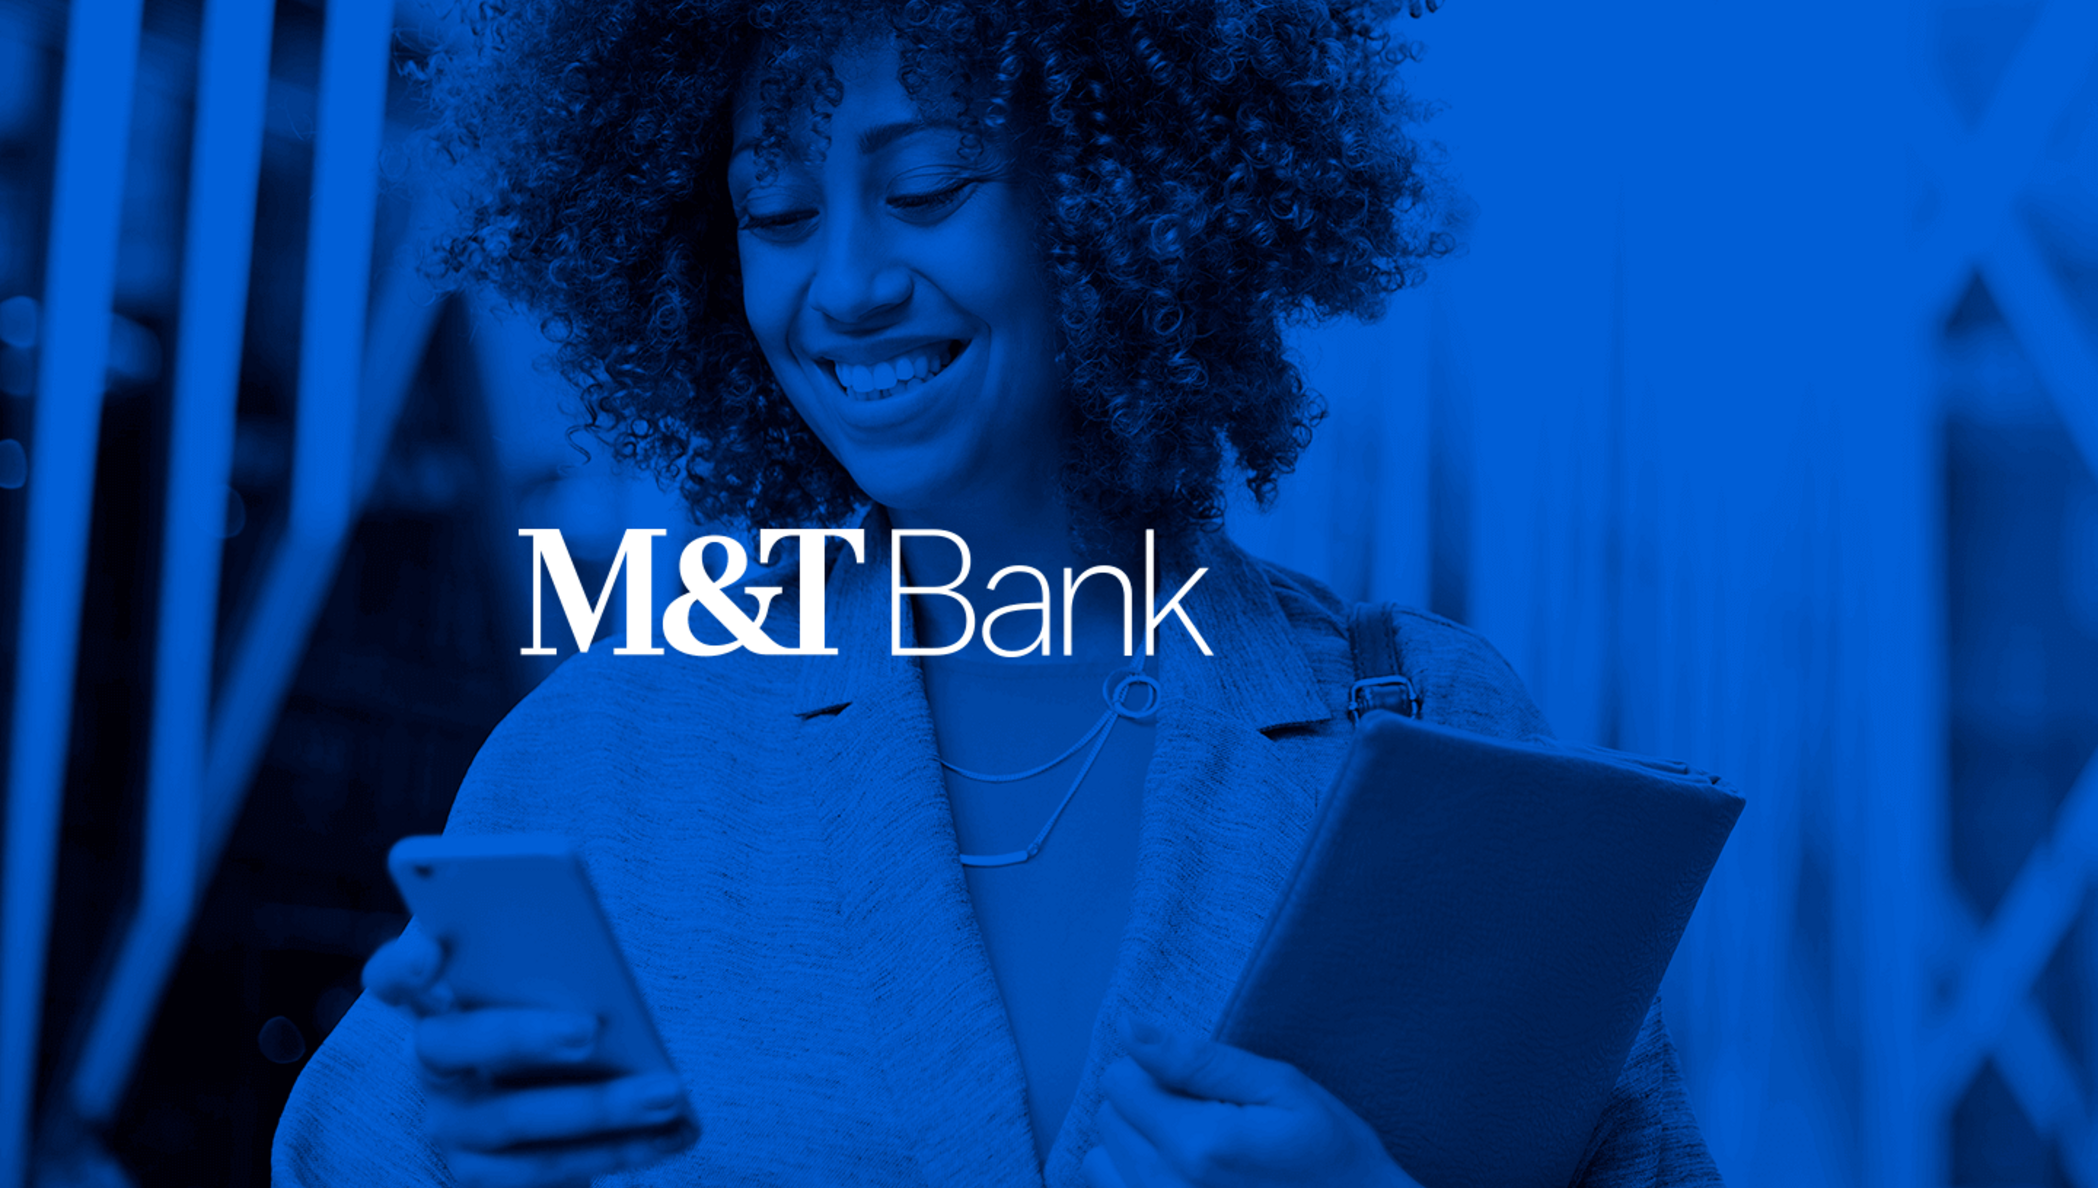 DocuSign customer M&T Bank is using digital ID verification to accelerate account opening and comply with Know Your Customer (KYC).